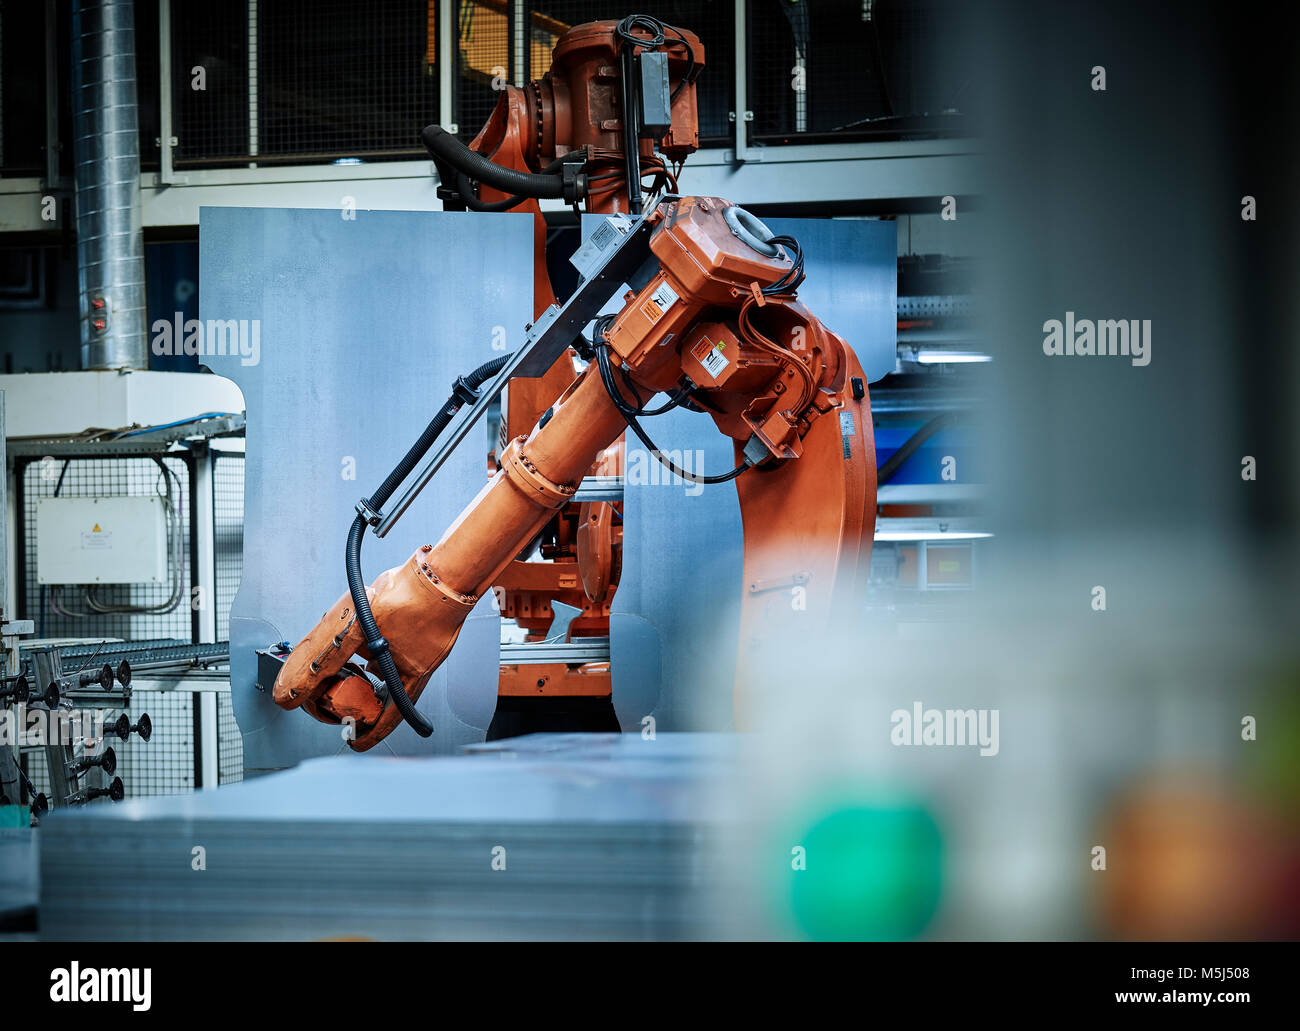 Industrial robot arm used in metalworking Stock Photo